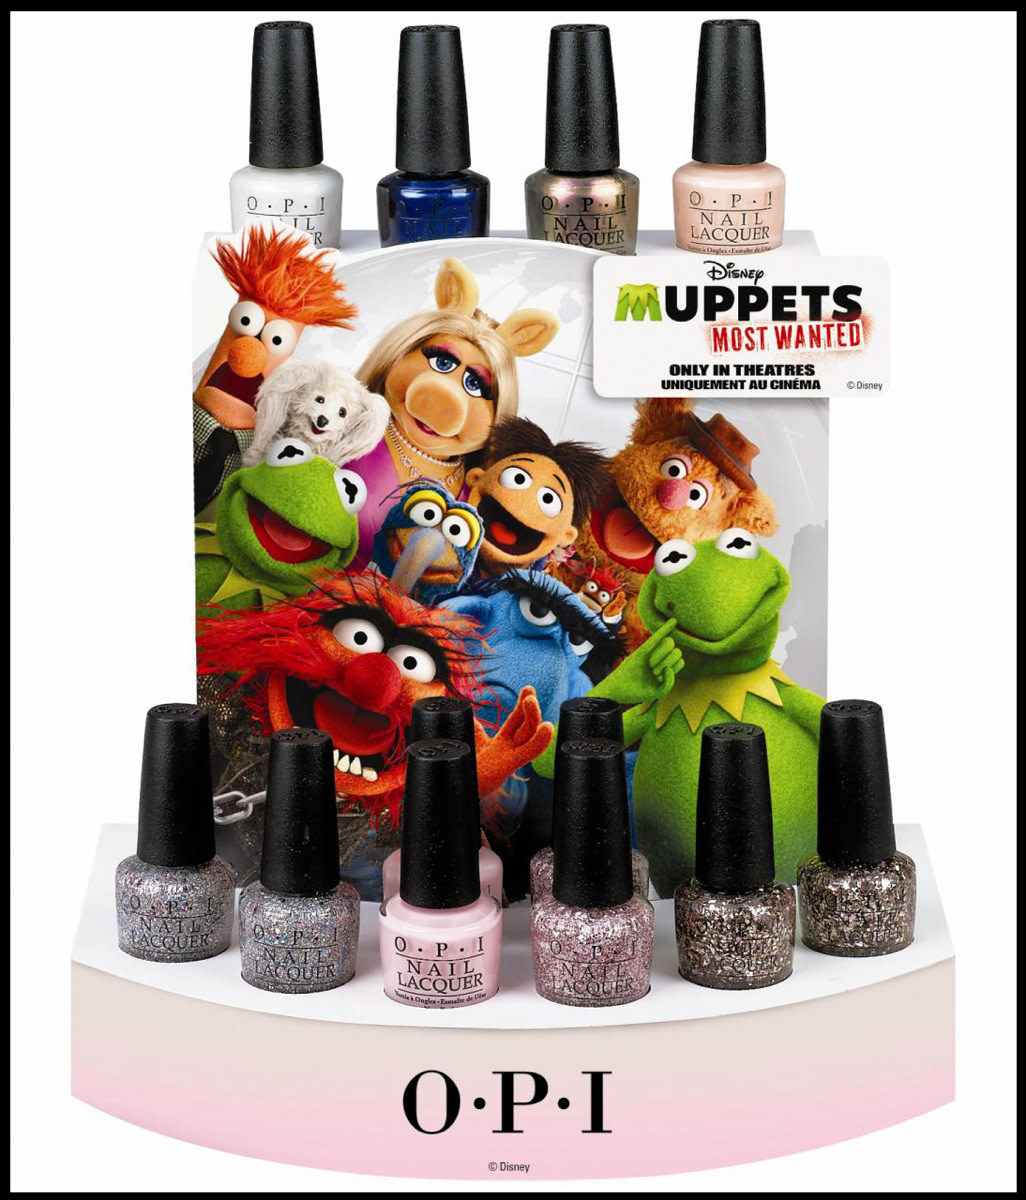 OPI Muppets Most Wanted Spring 2014 Display